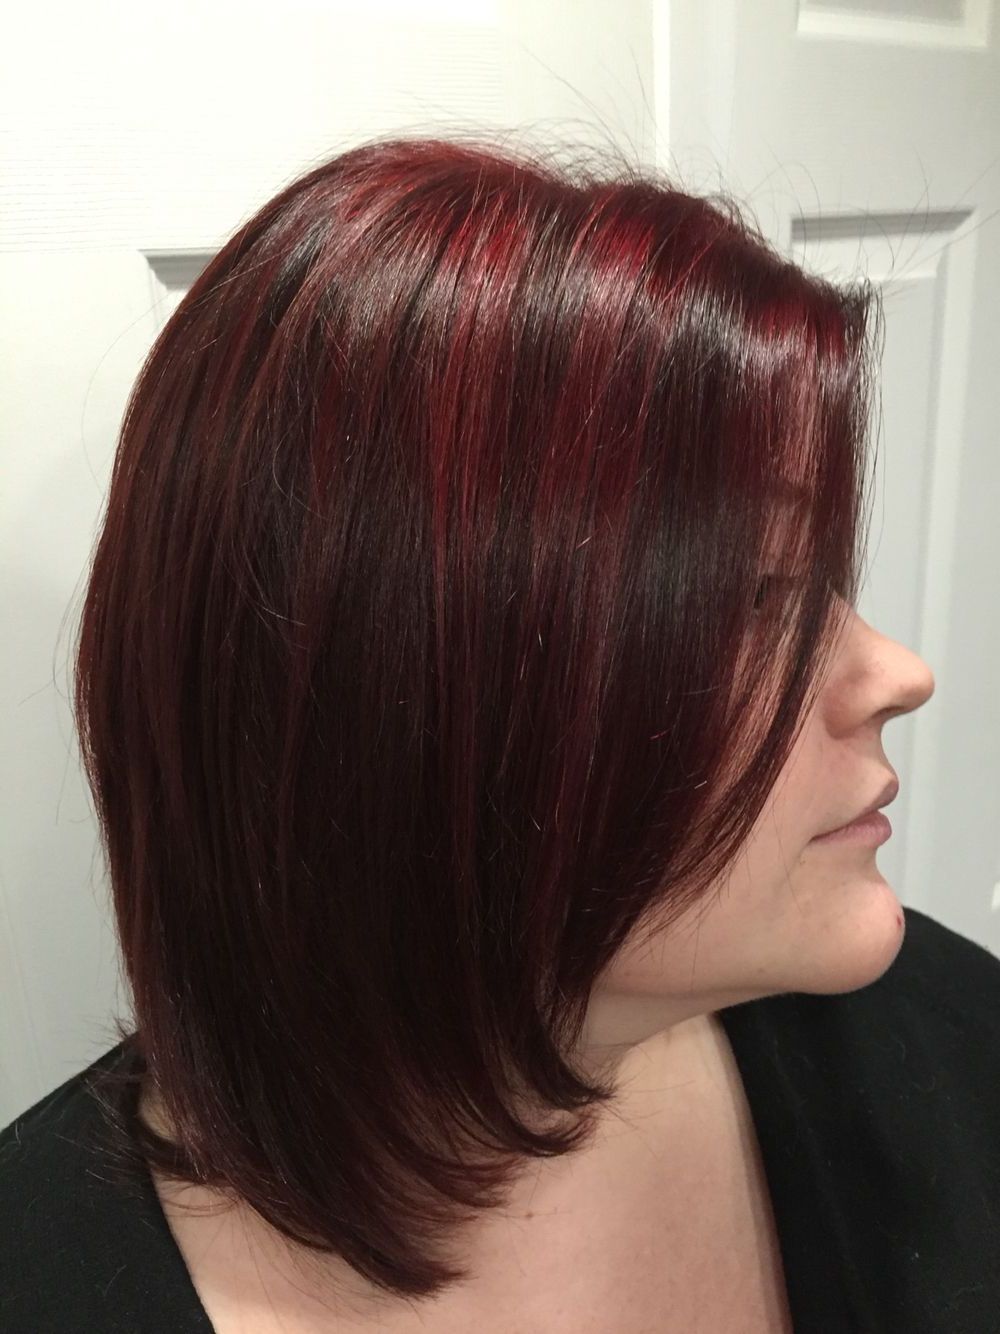 Long Layered Bob With Cherry Red Highlights On Natural Dark Brown Regarding Short Hairstyles With Red Highlights (View 22 of 25)